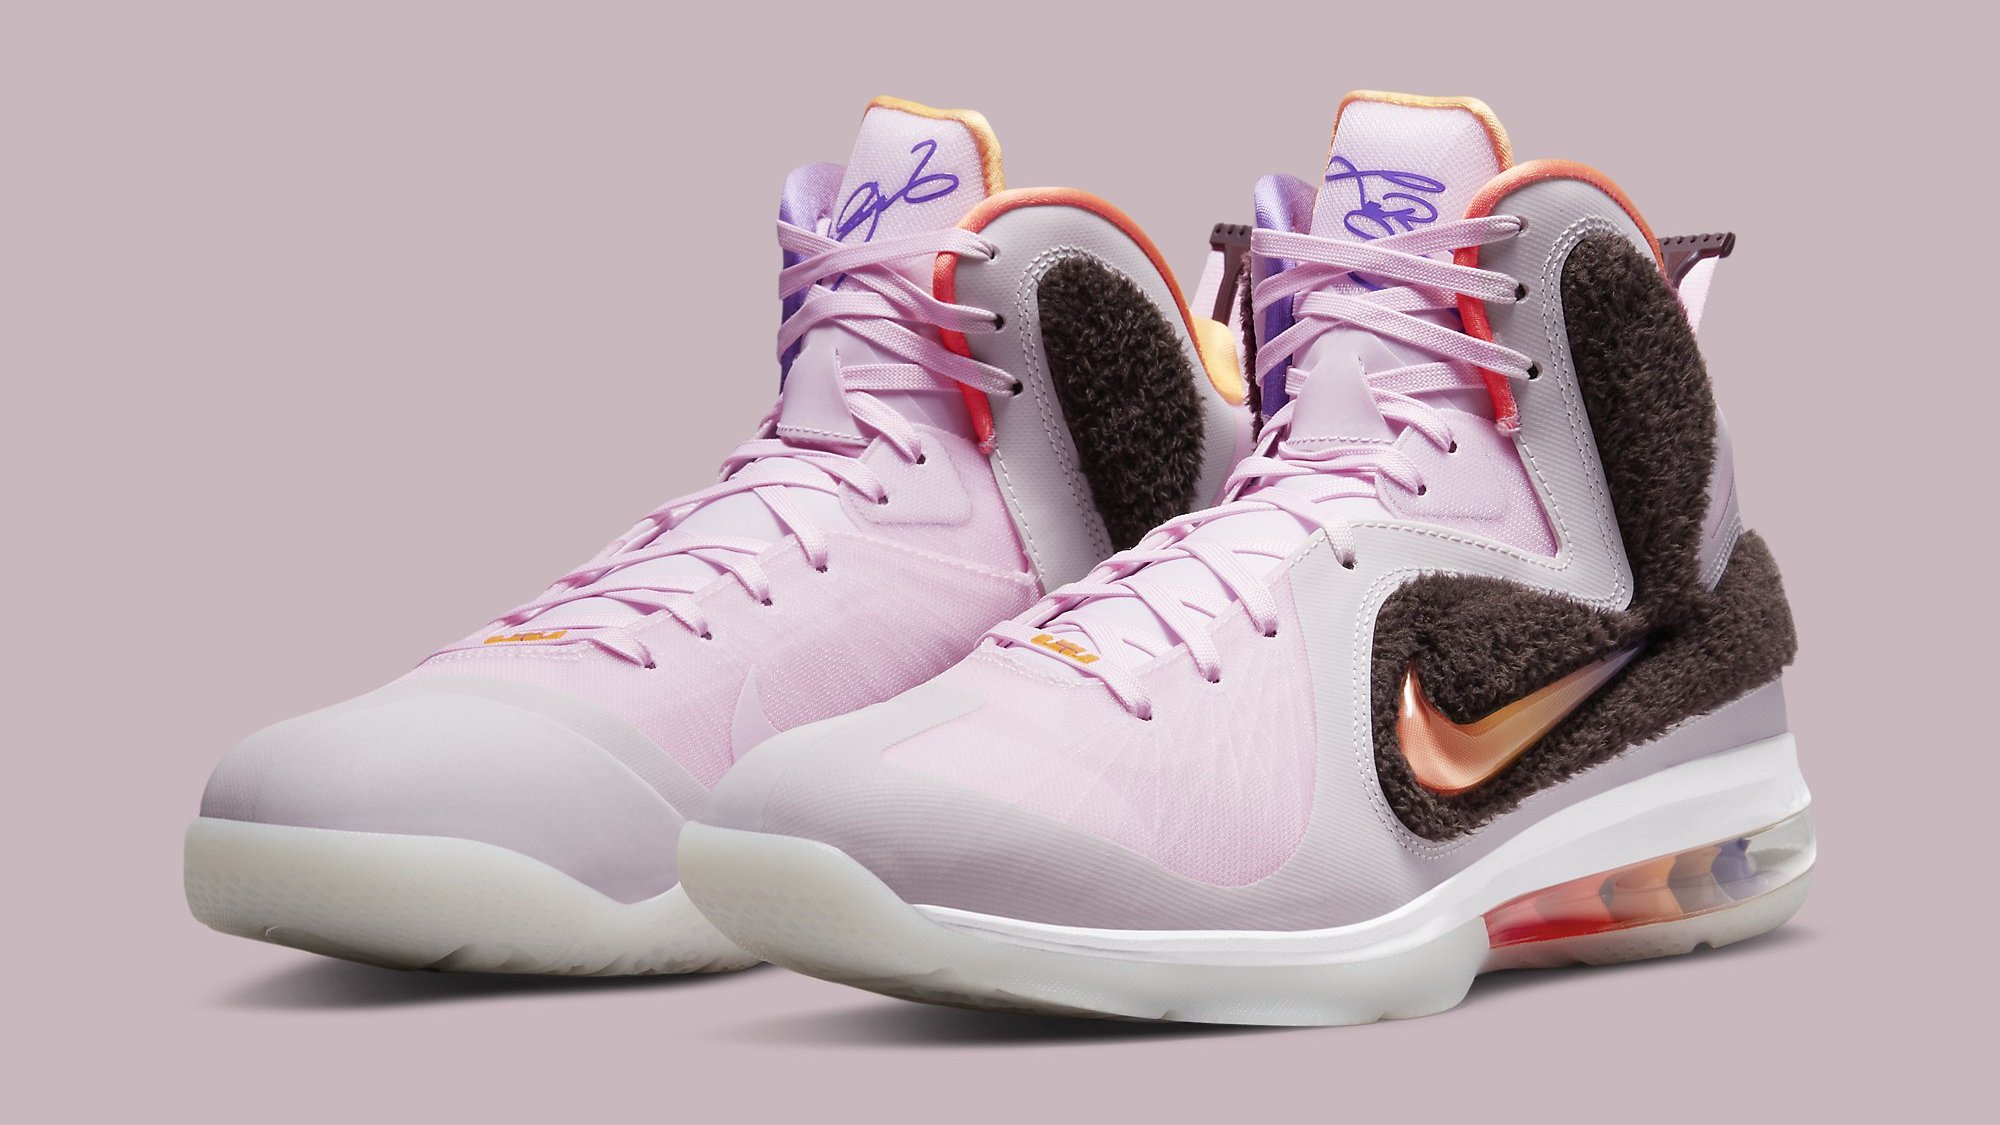 Detailed Look at the 'Regal Pink' Nike LeBron 9